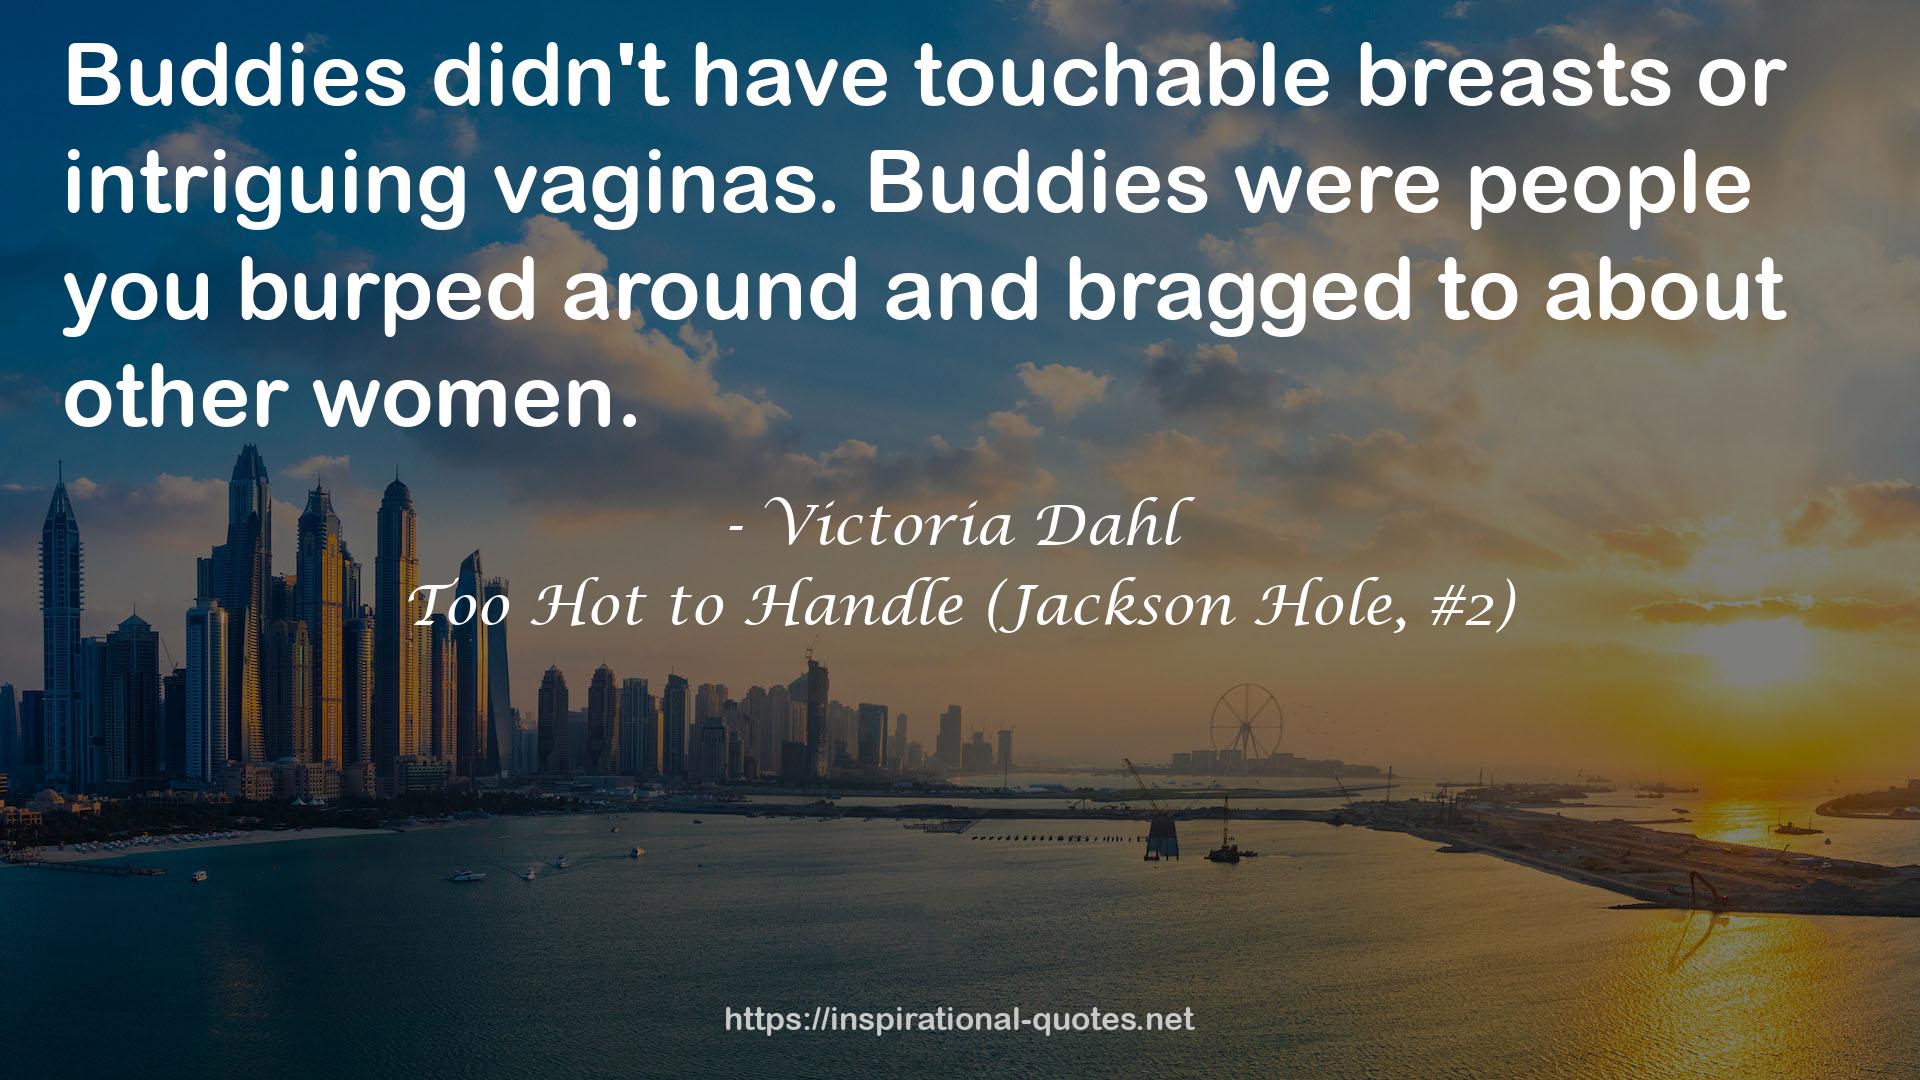 Too Hot to Handle (Jackson Hole, #2) QUOTES